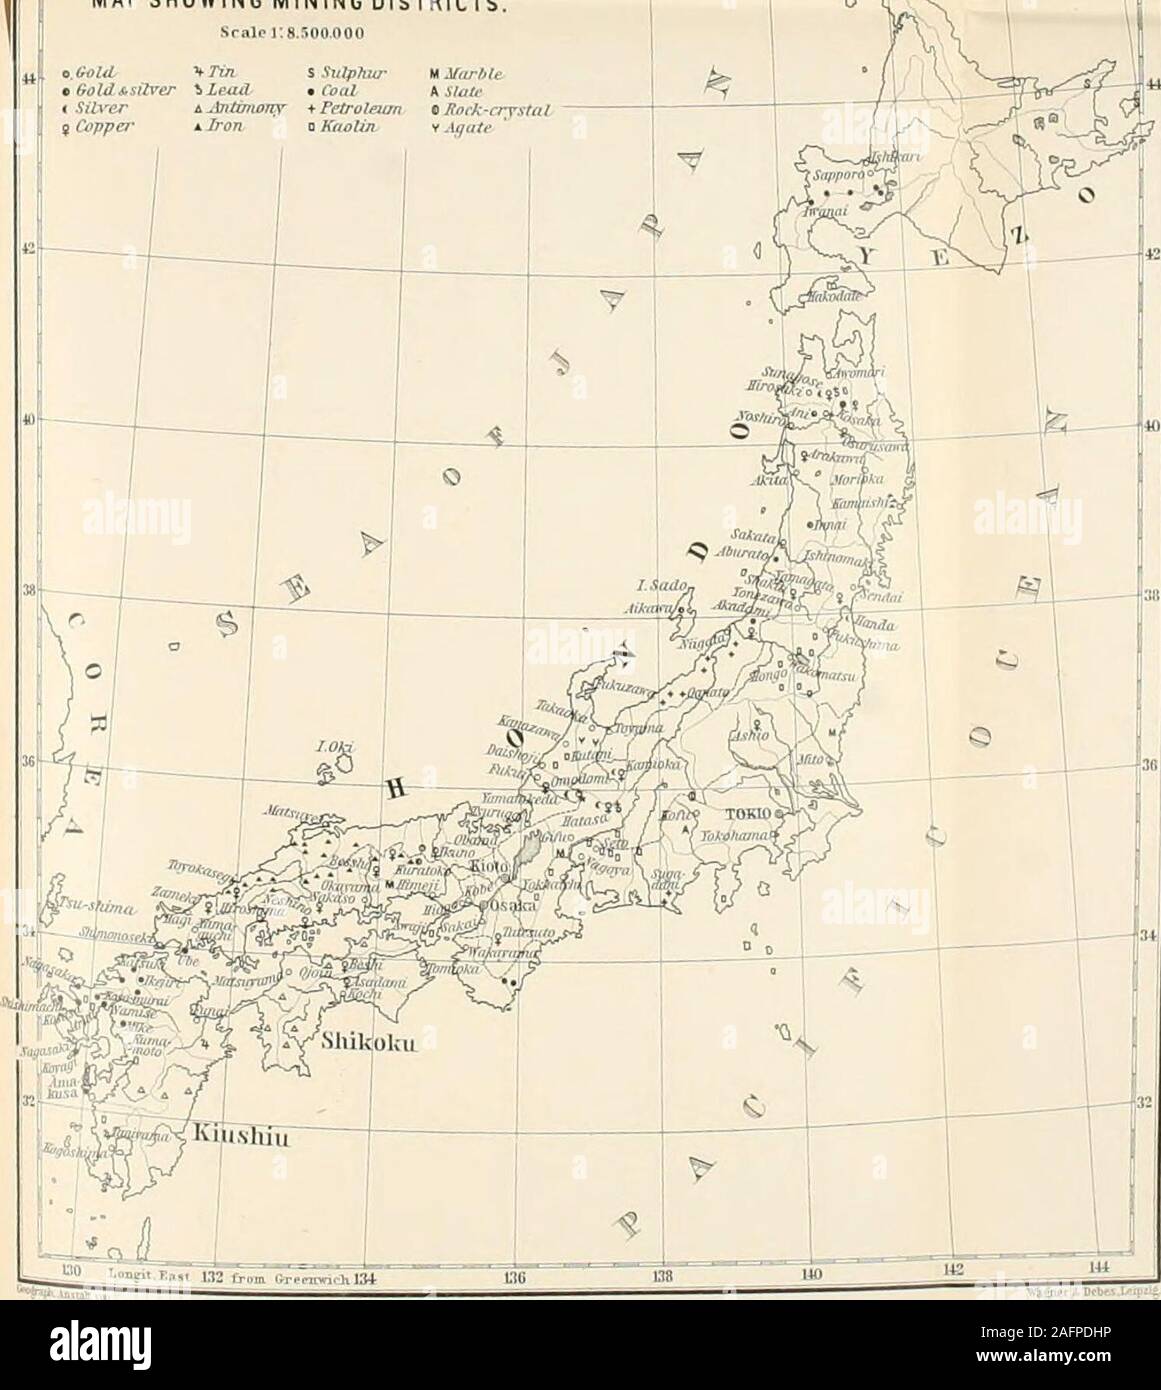 . The industries of Japan : together with an account of its agriculture, forestry, arts, and commerce. From travels and researches undertaken at the cost of the Prussian government. U02rapl. Anstali van 138 140 JAPAN: MAP SHOWING MINING DISTRICTS Srale]:8.500noo. I.—ENGLISH AND LATIN INDEX. Abies Alcockiana, 235. bicolor, 235. firma, 214, 235. Jesoensis, 236. Menziesii, 236. polita, 235. Tsuga, 214. Veitchii, 235.Abietinea?, 235-238.Acanthopax ricinifolia, 248.Acclimatisation, 274.Acer cratregifolium, 285. japonicum, 252. palmatum, 251. polymorphum, 45, 272.Acerinece, 251.Aconitum Fischeri, 1 Stock Photo